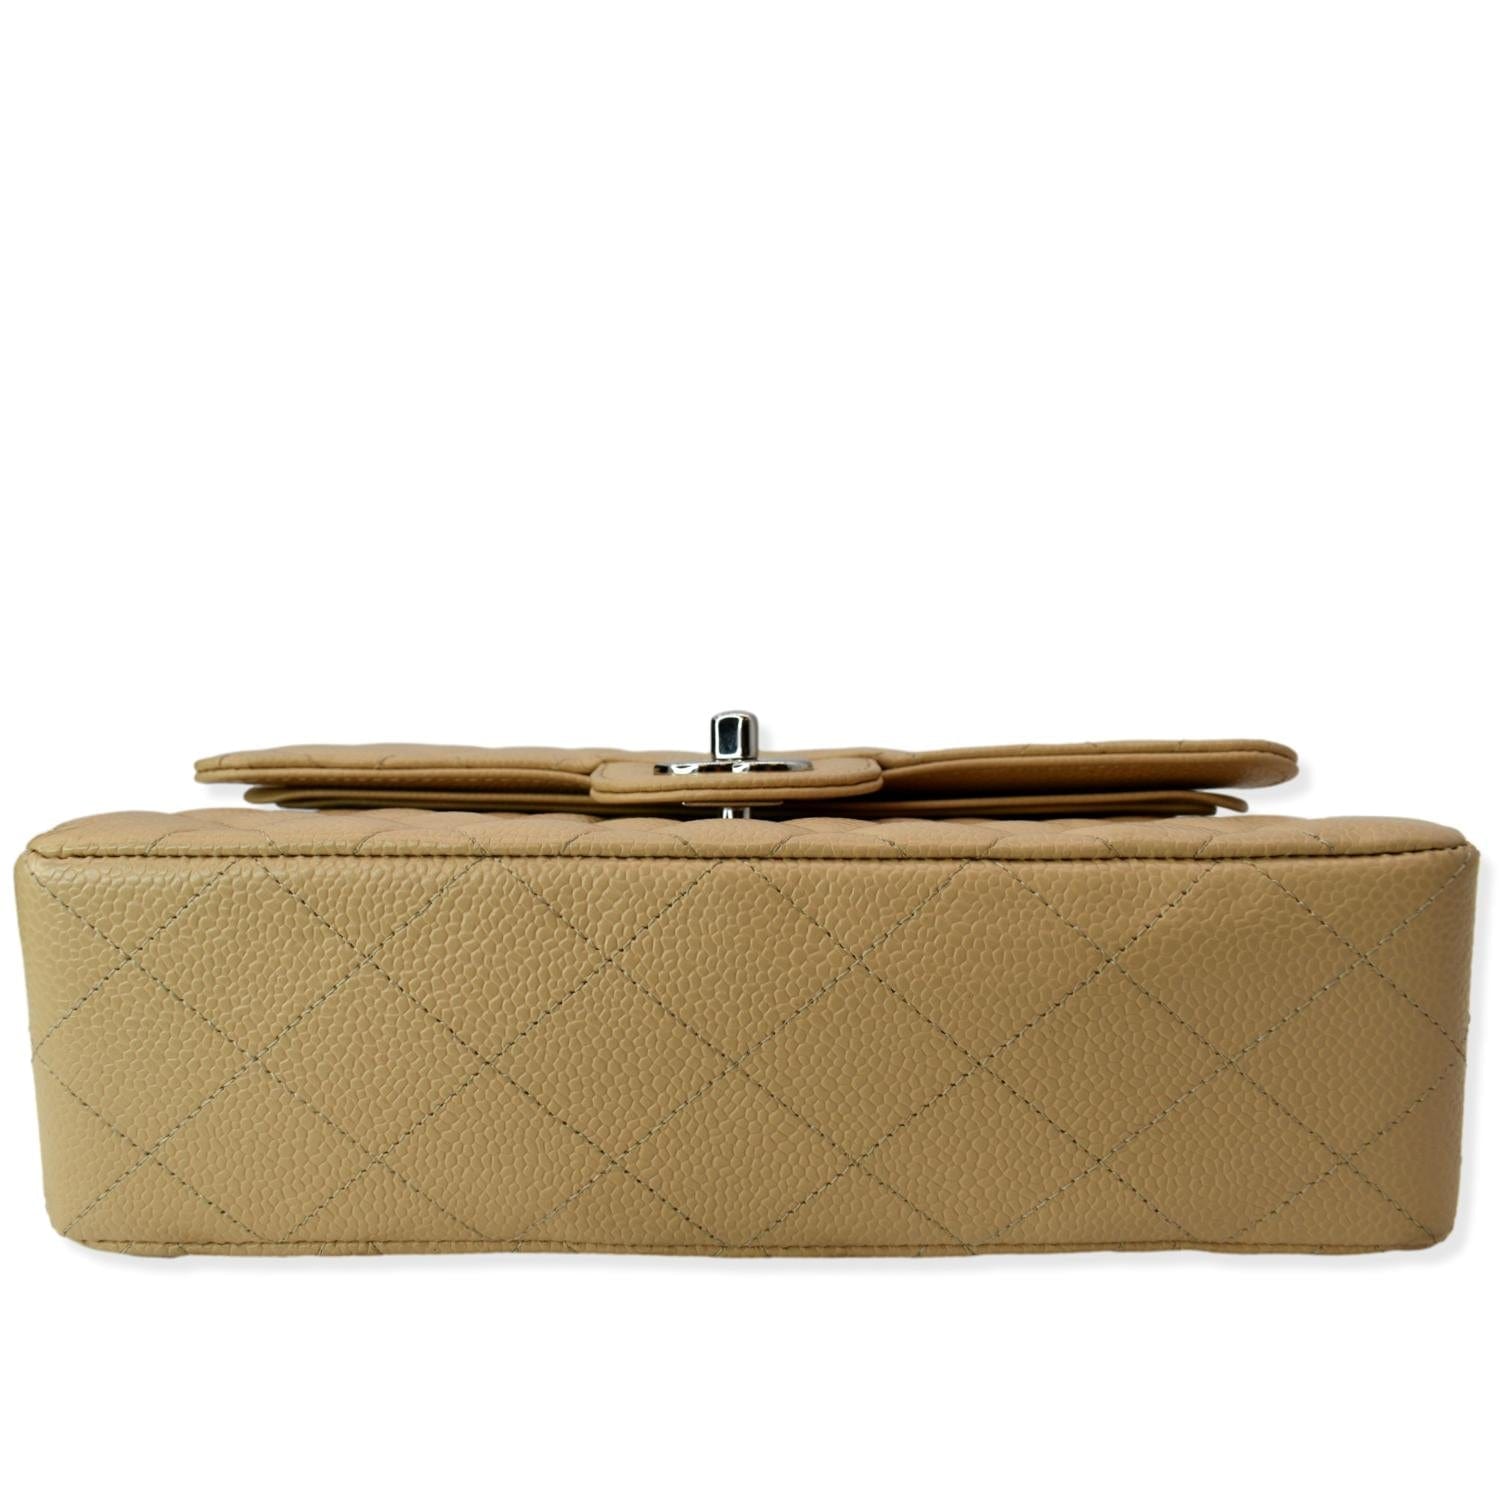 Timeless/classique leather purse Chanel Camel in Leather - 34573852